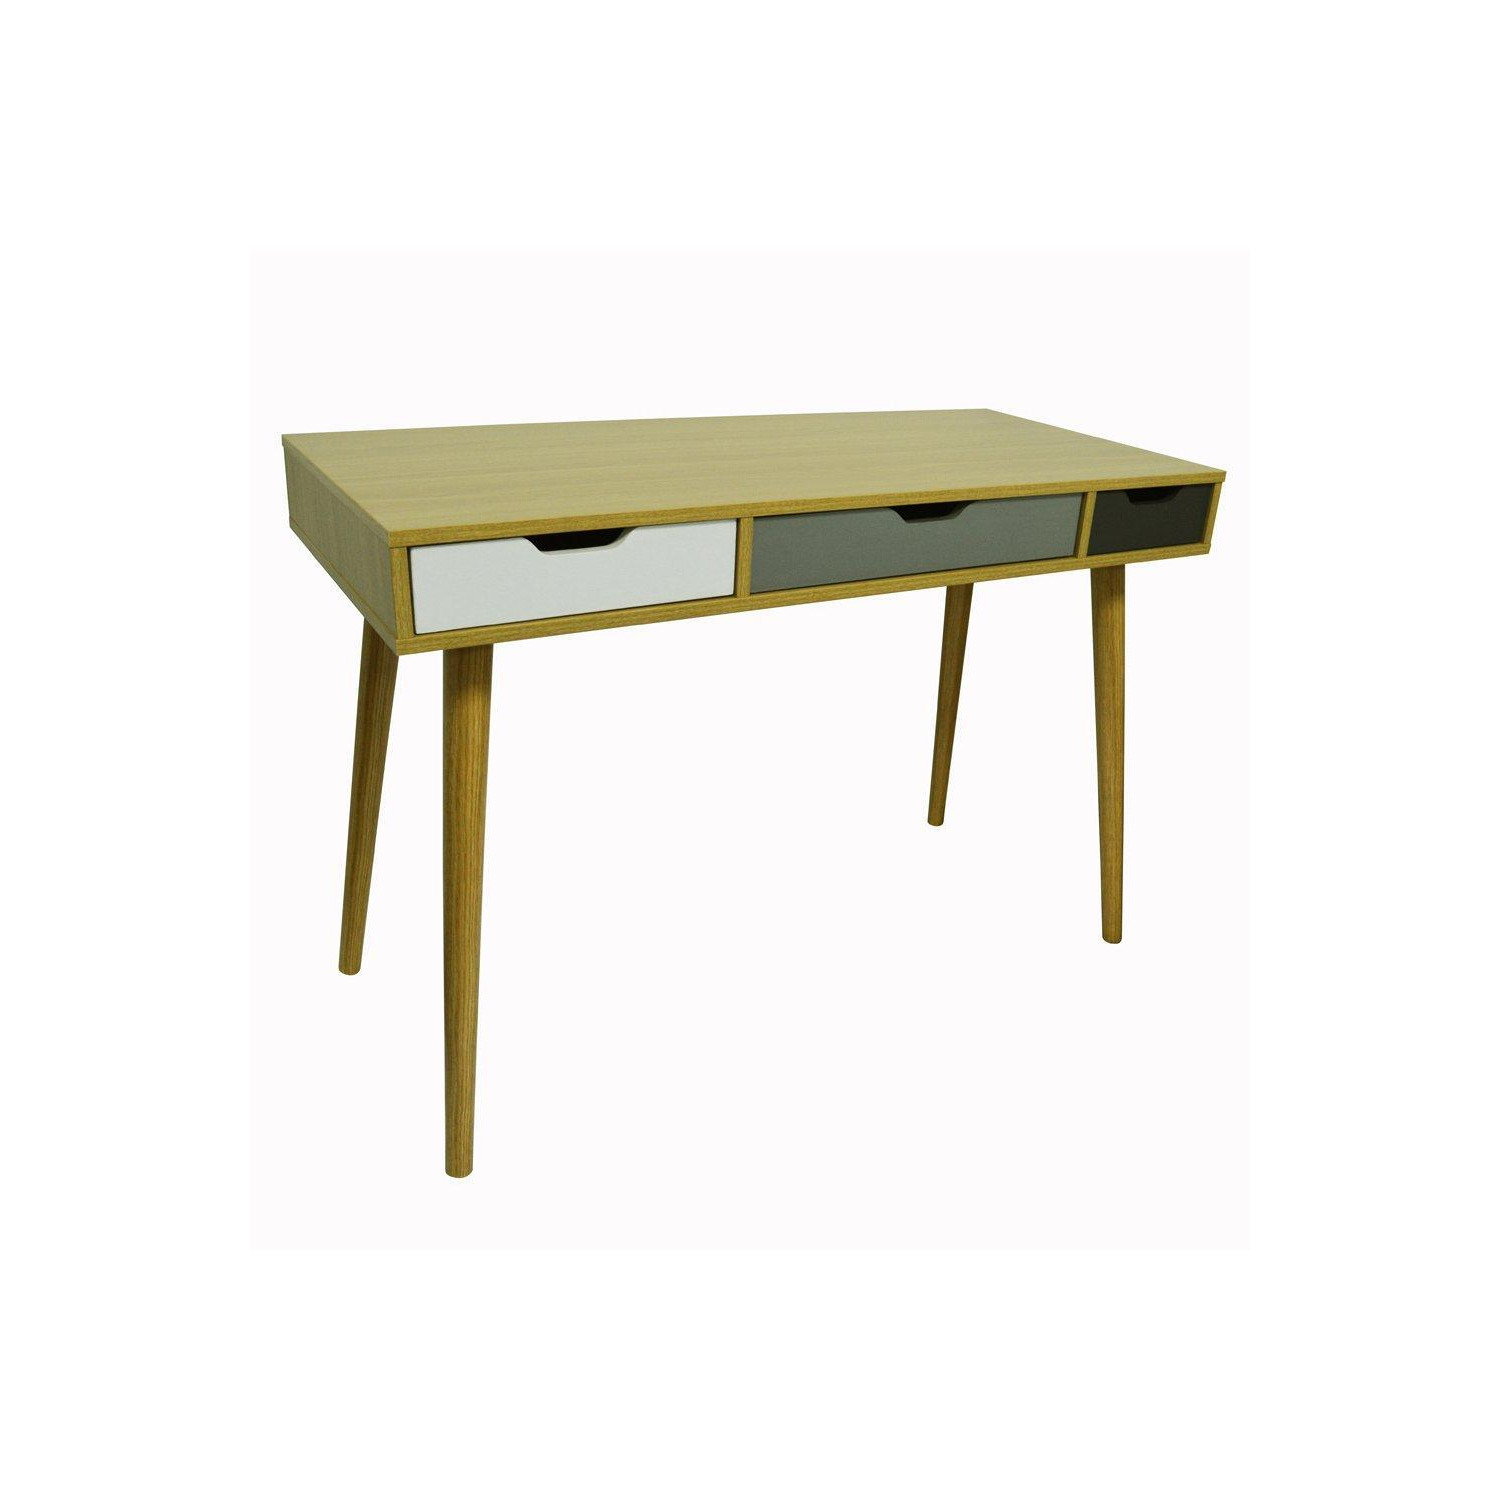 'Industrial' - 2 Drawer Office Computer Desk  Dressing Table - Beech  Multicoloured - image 1